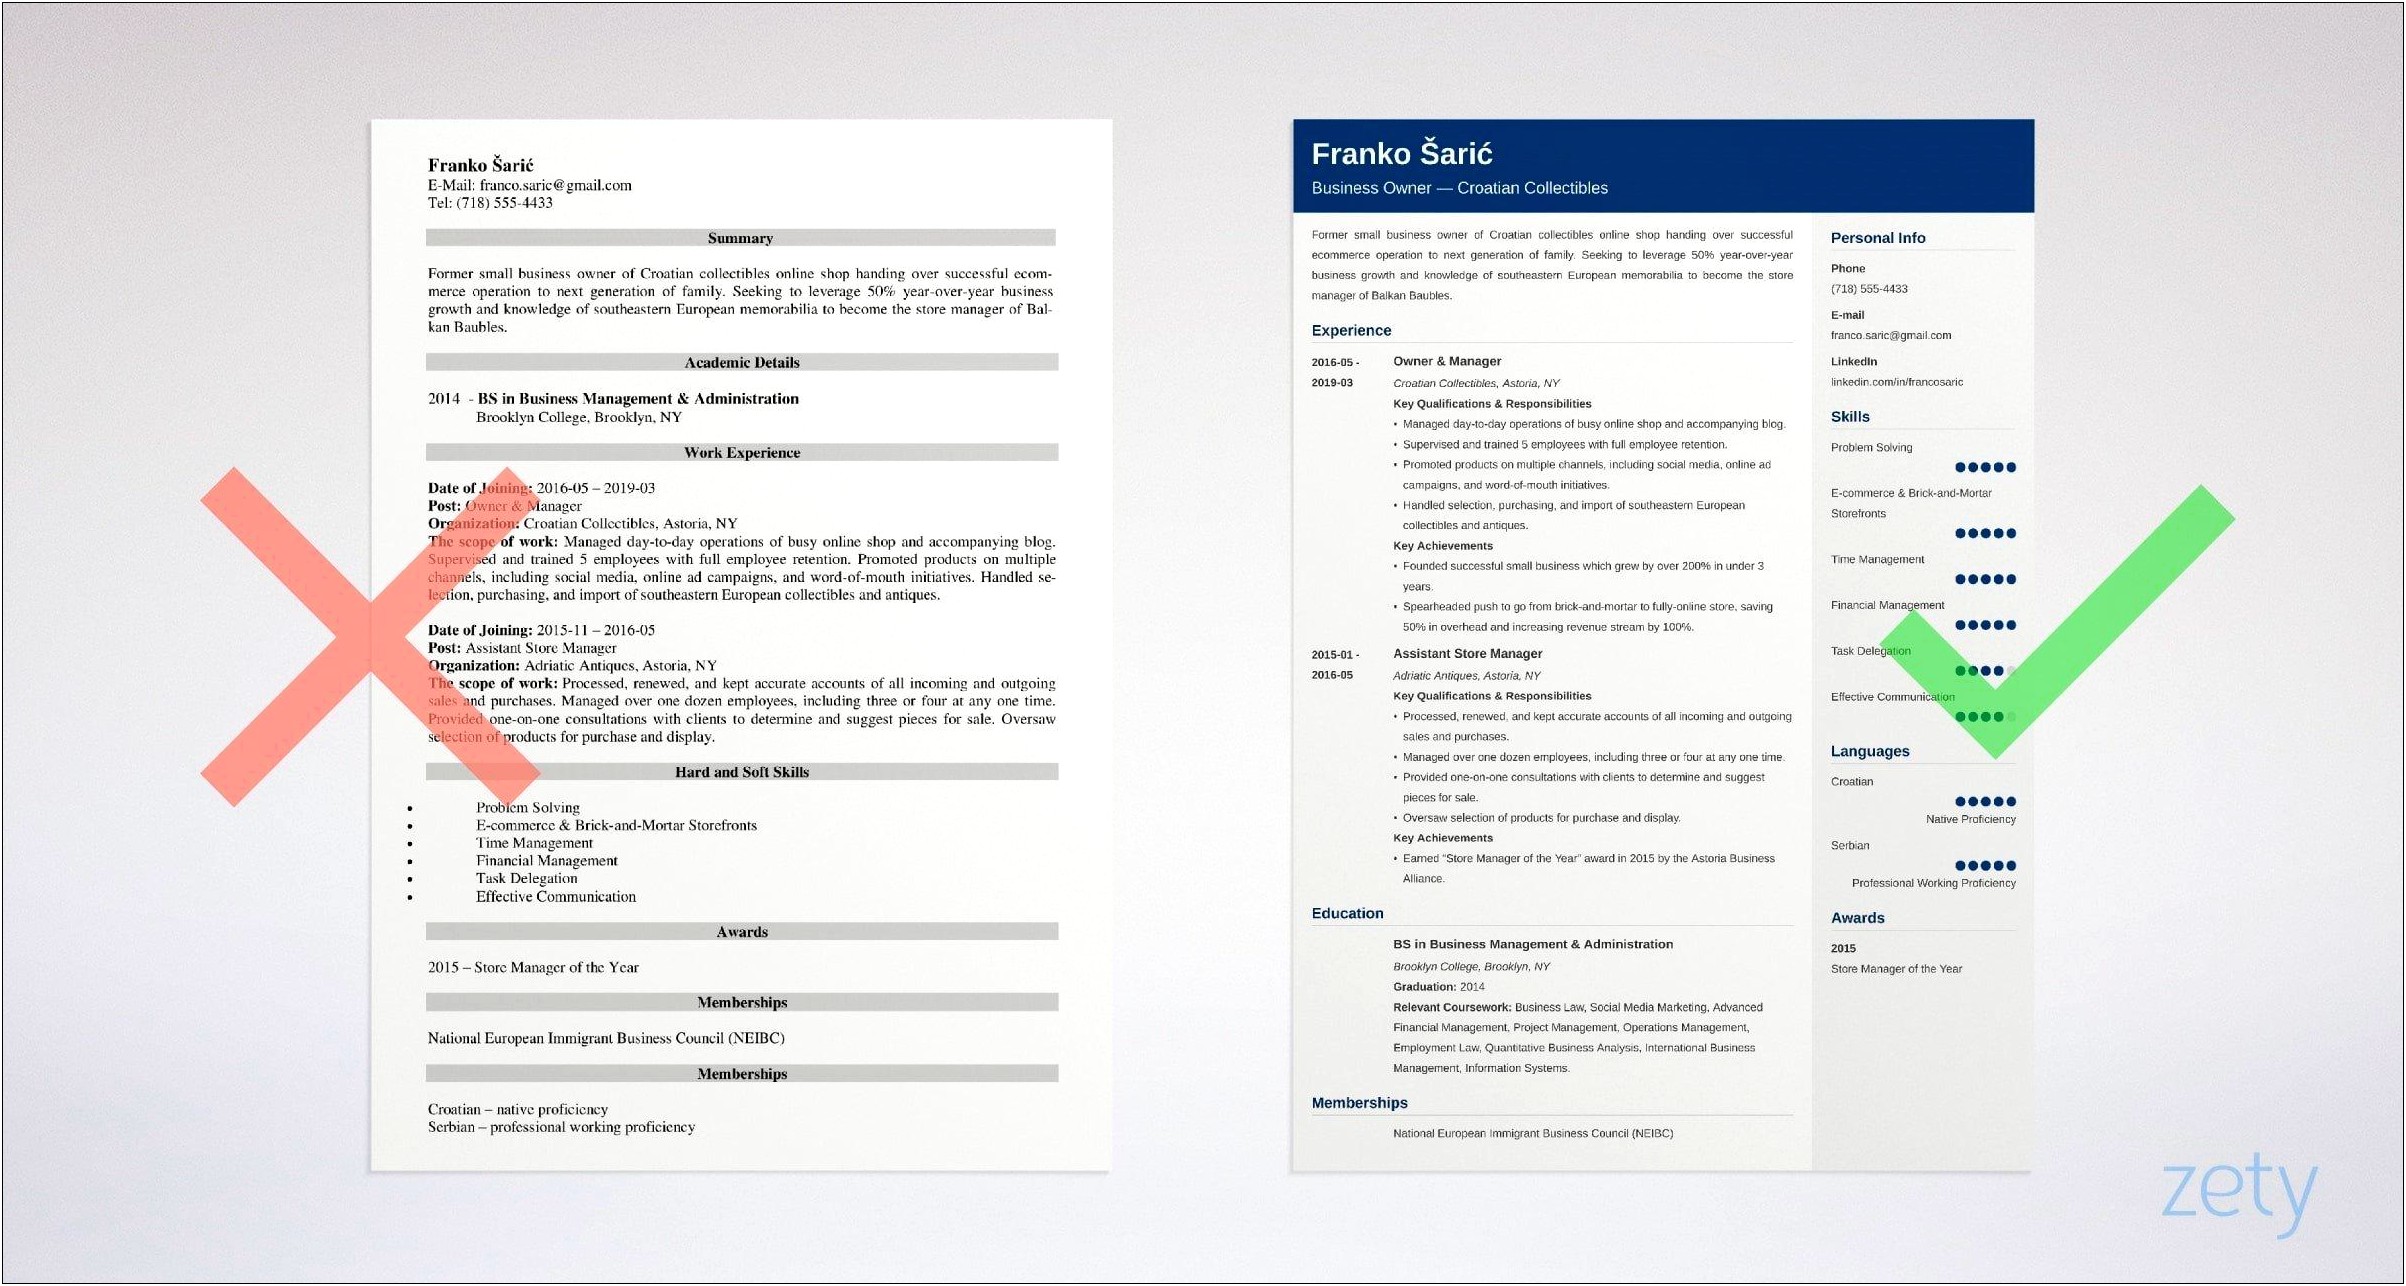 Resume Objective Examples Business Owner